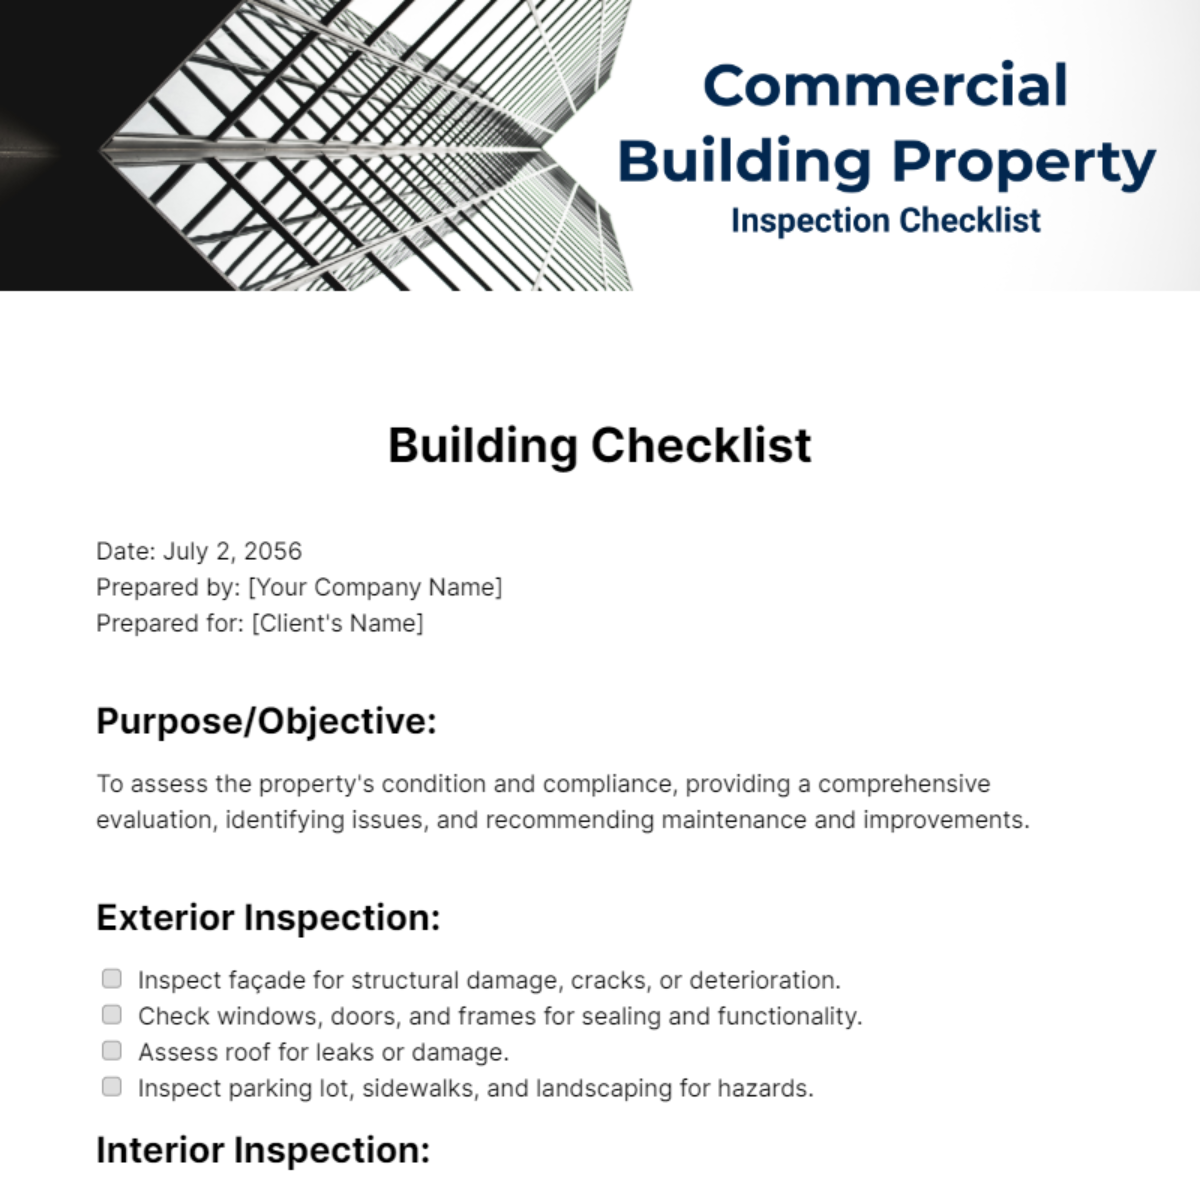 Commercial Building Property Inspection Checklist Template